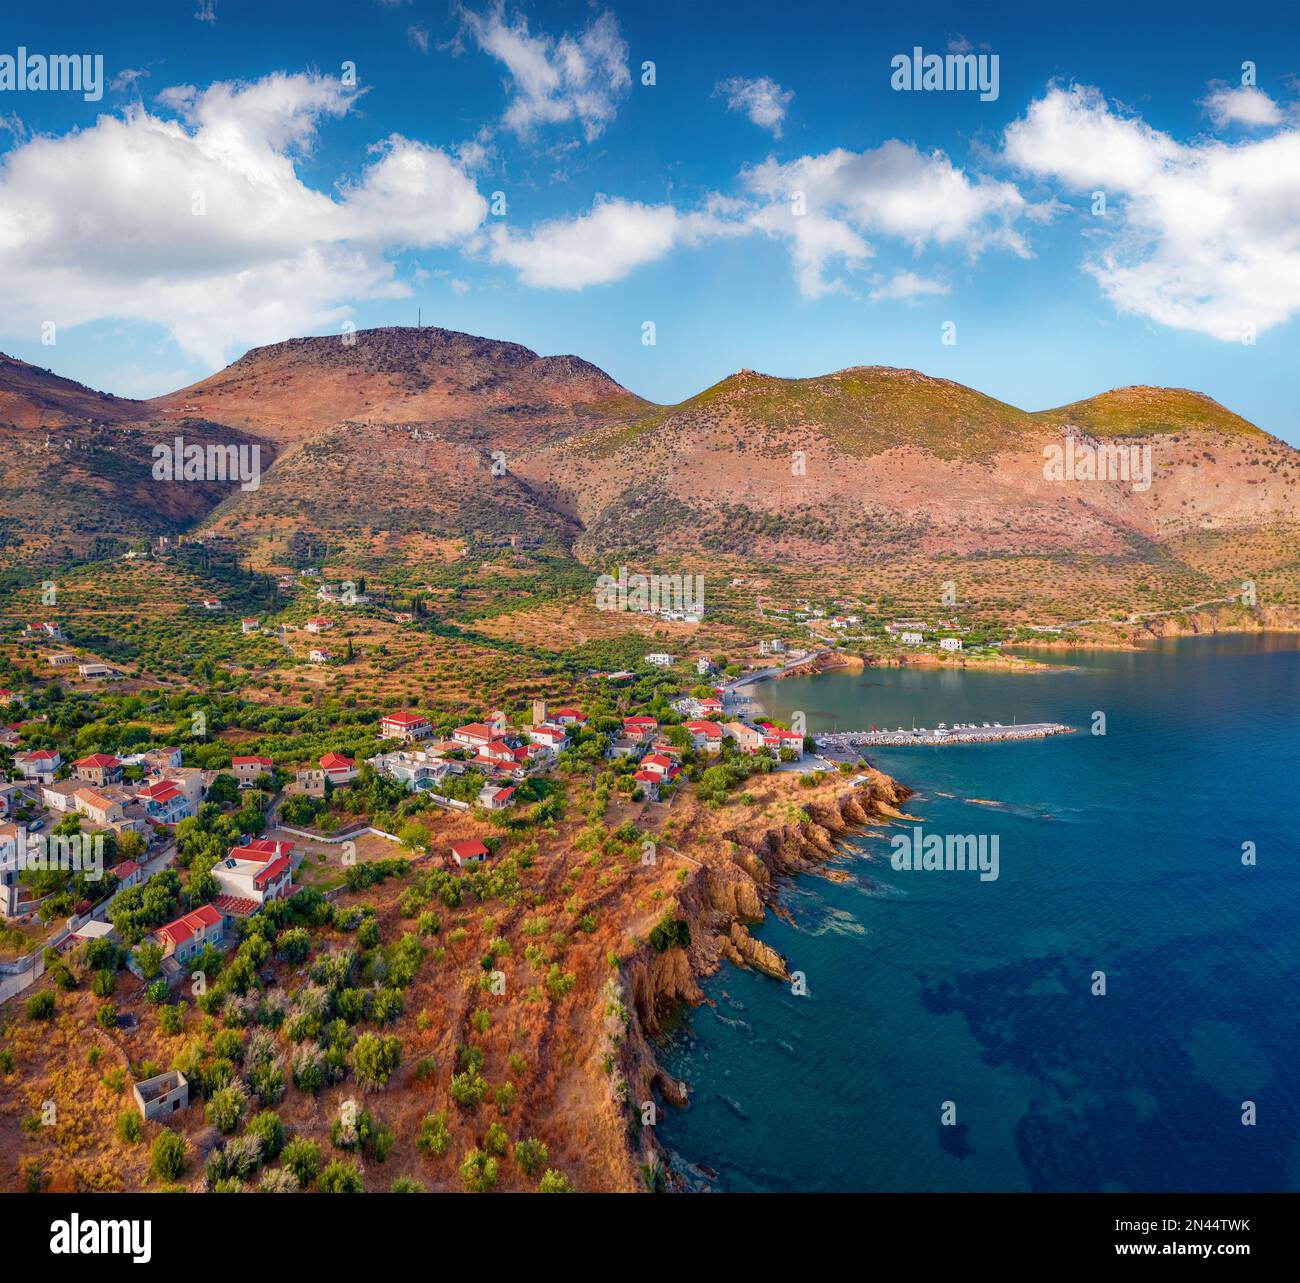 View from flying drone of Kotronas village. Picturesque evening seascape of Mediterranean sea. Beautiful outdoor scene of Peloponnese peninsula, Greec Stock Photo